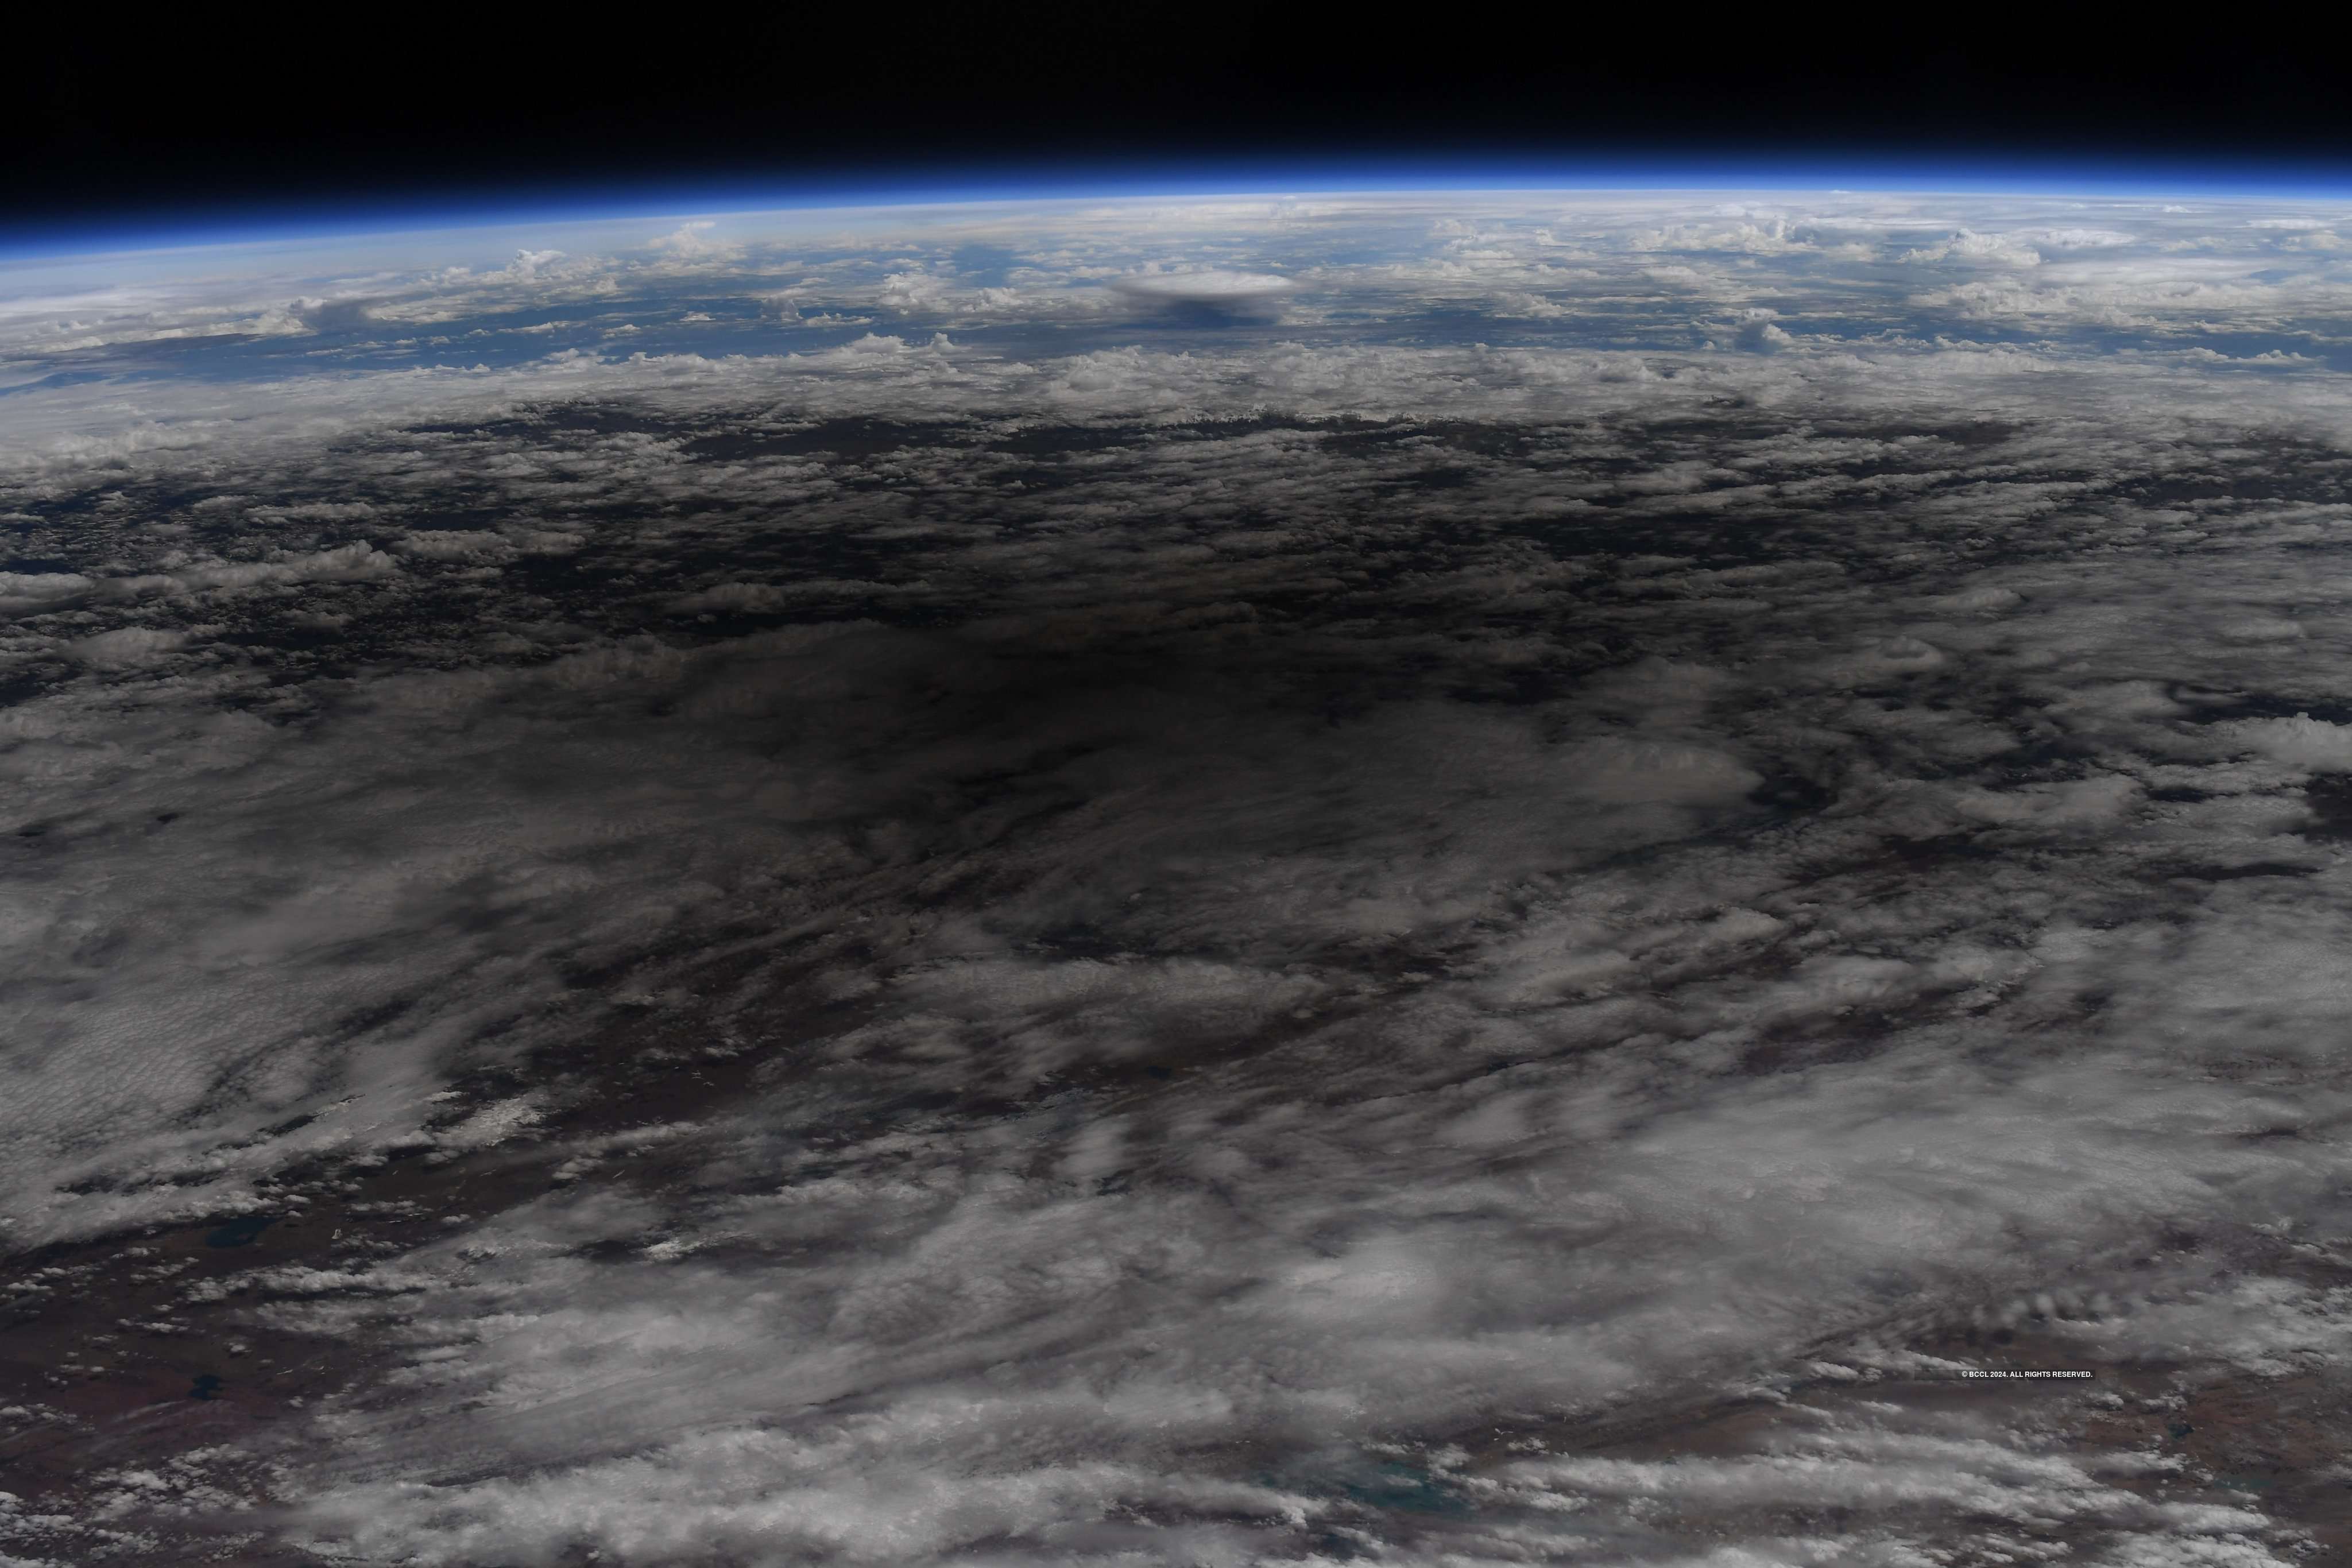 NASA astronaut shares spectacular Solar Eclipse images from space